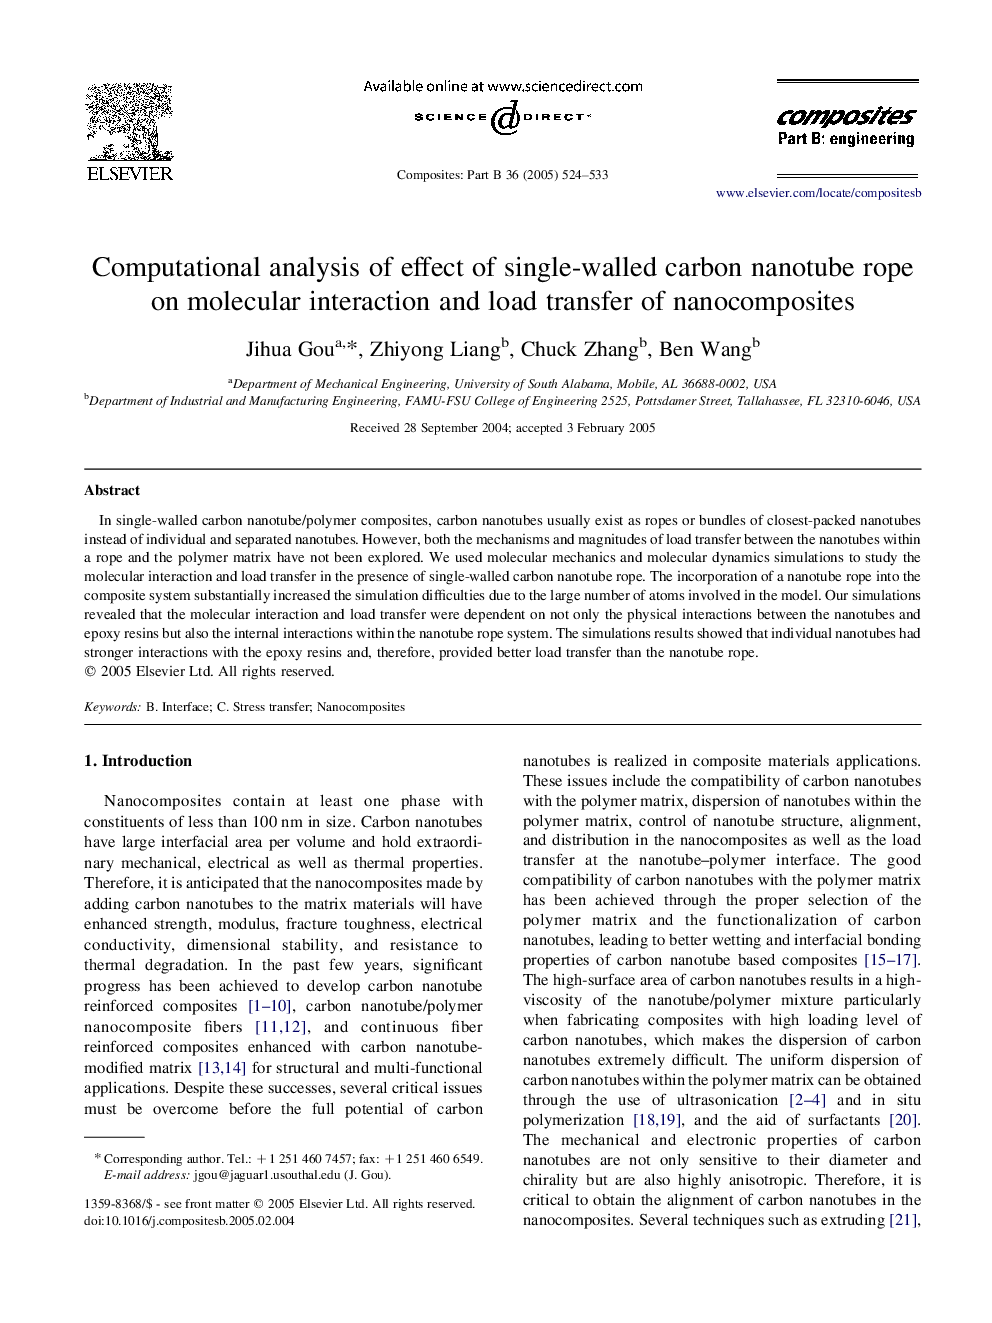 Computational analysis of effect of single-walled carbon nanotube rope on molecular interaction and load transfer of nanocomposites